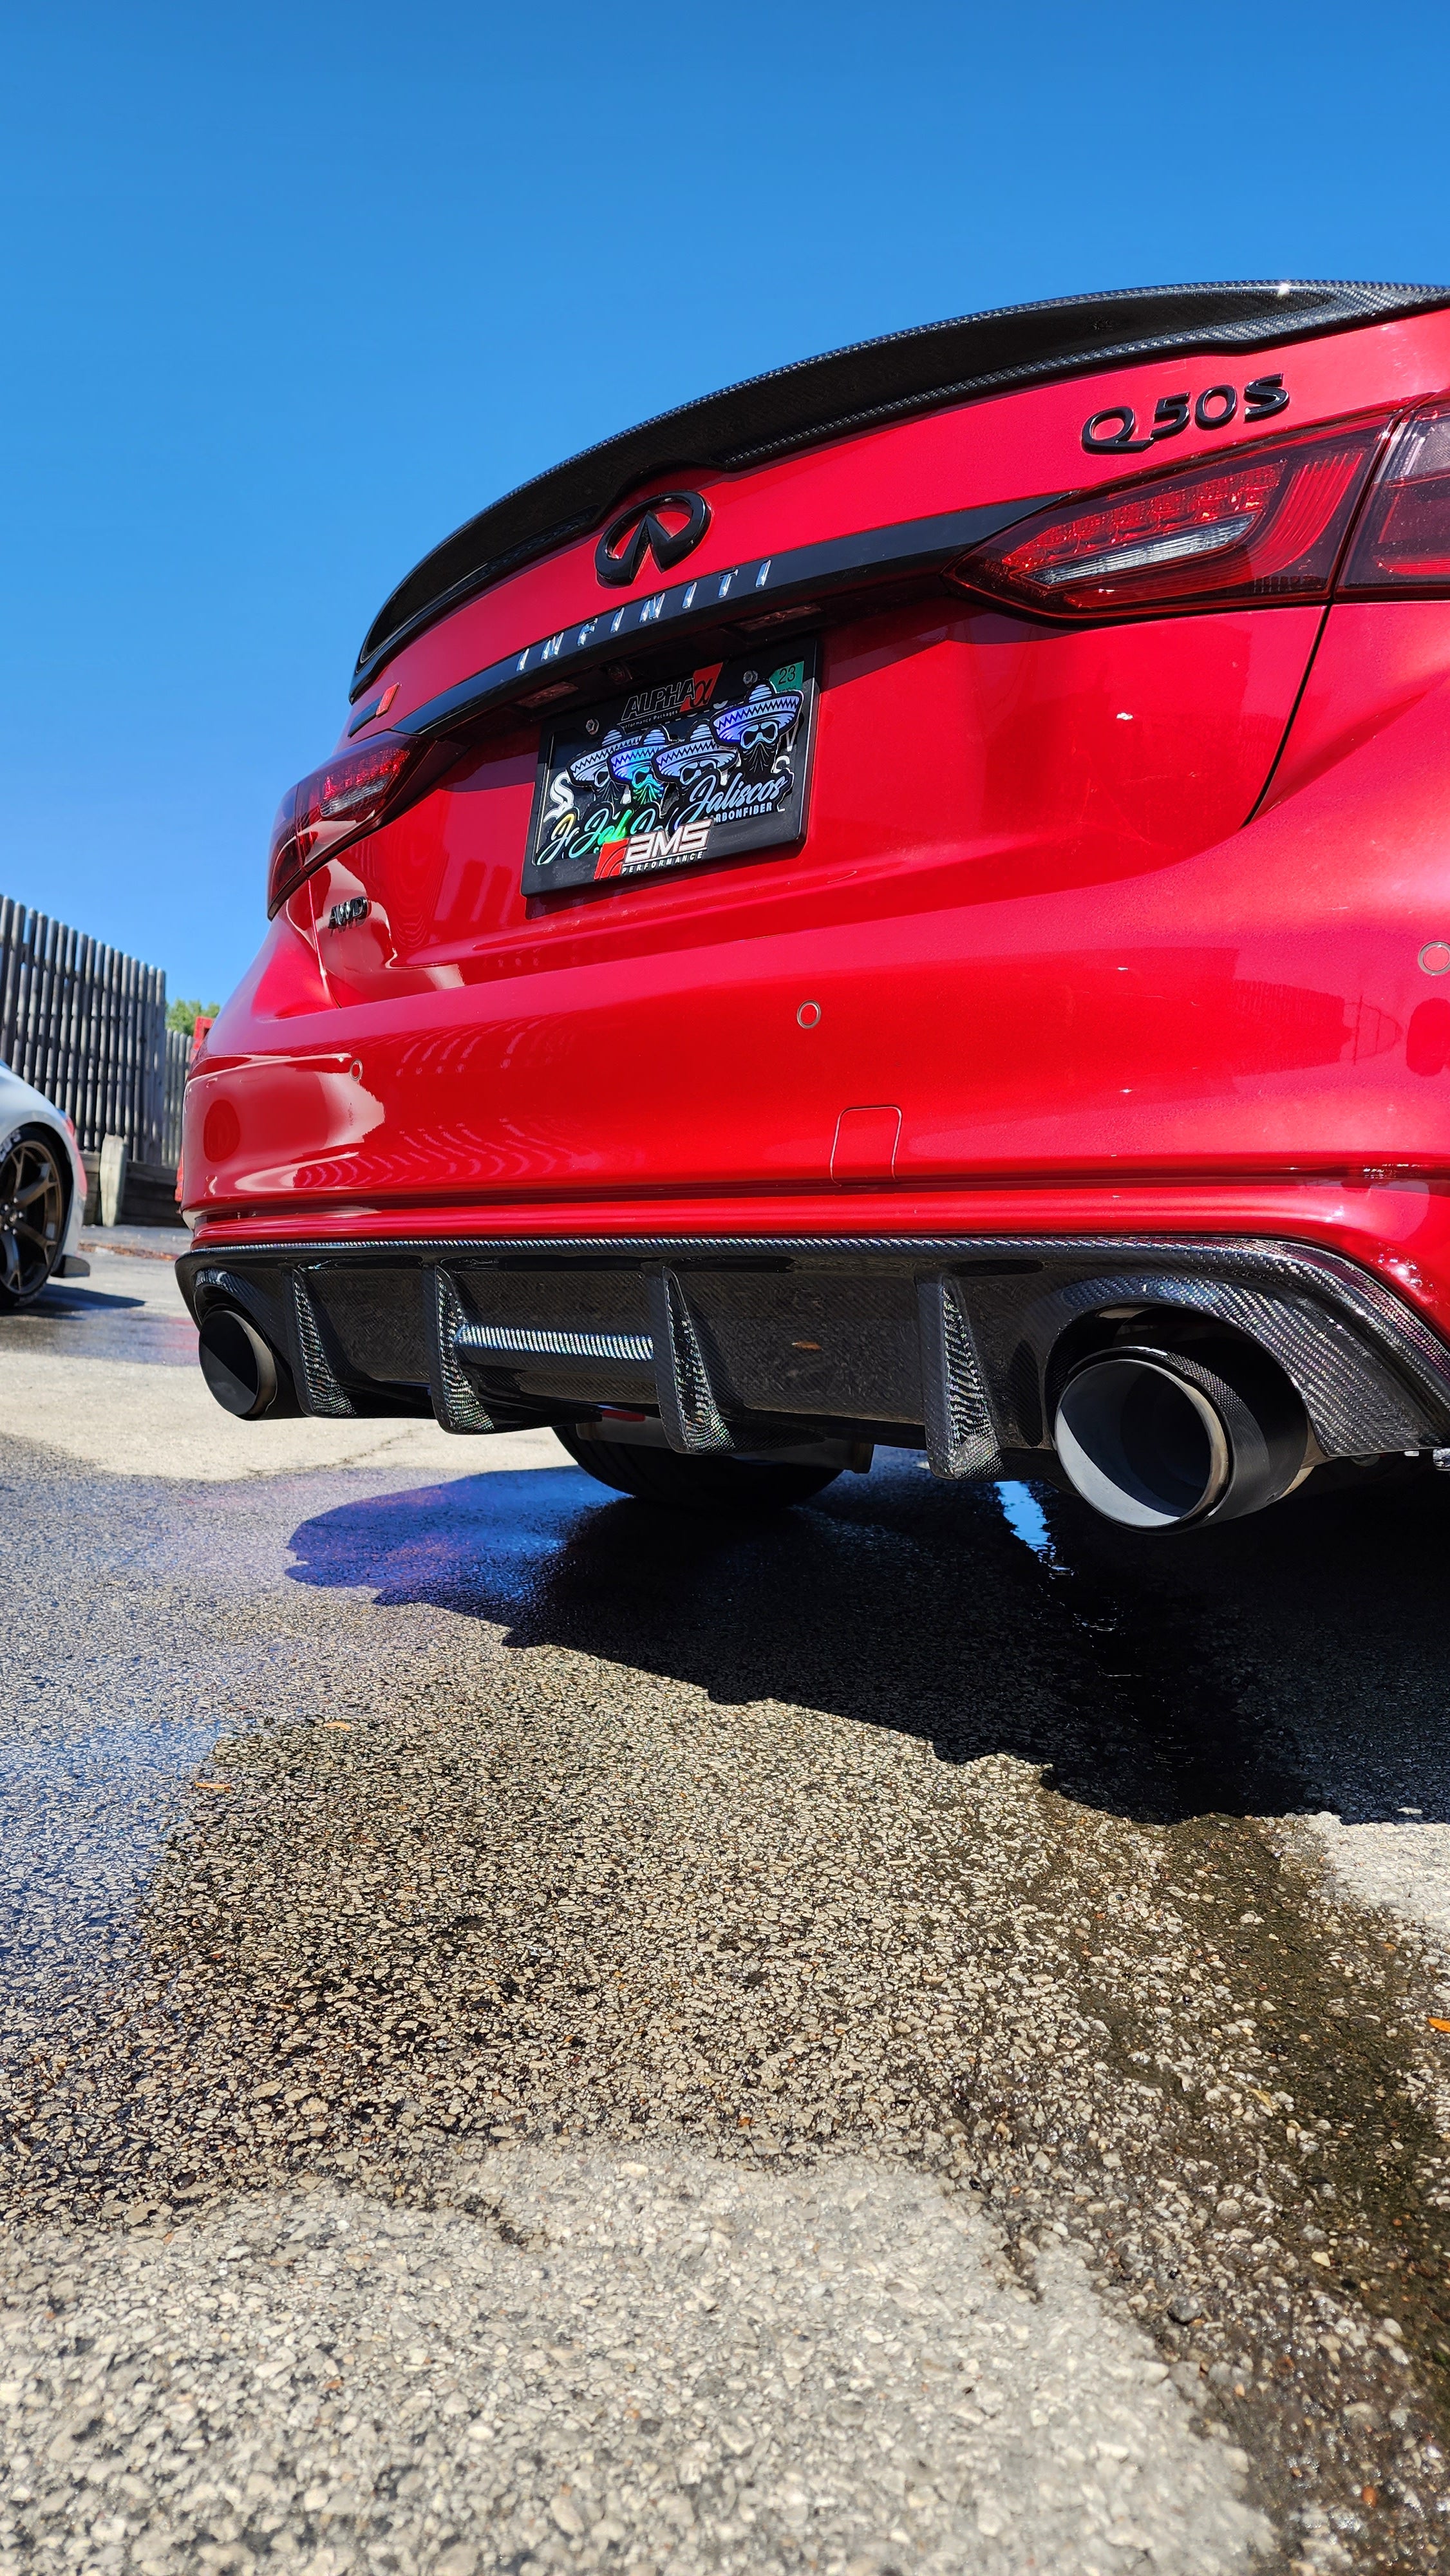 Alternate angle view of the red Infiniti Q50 2018 highlighting Jalisco's CF Carbon Fiber 'OG' Style Diffuser.